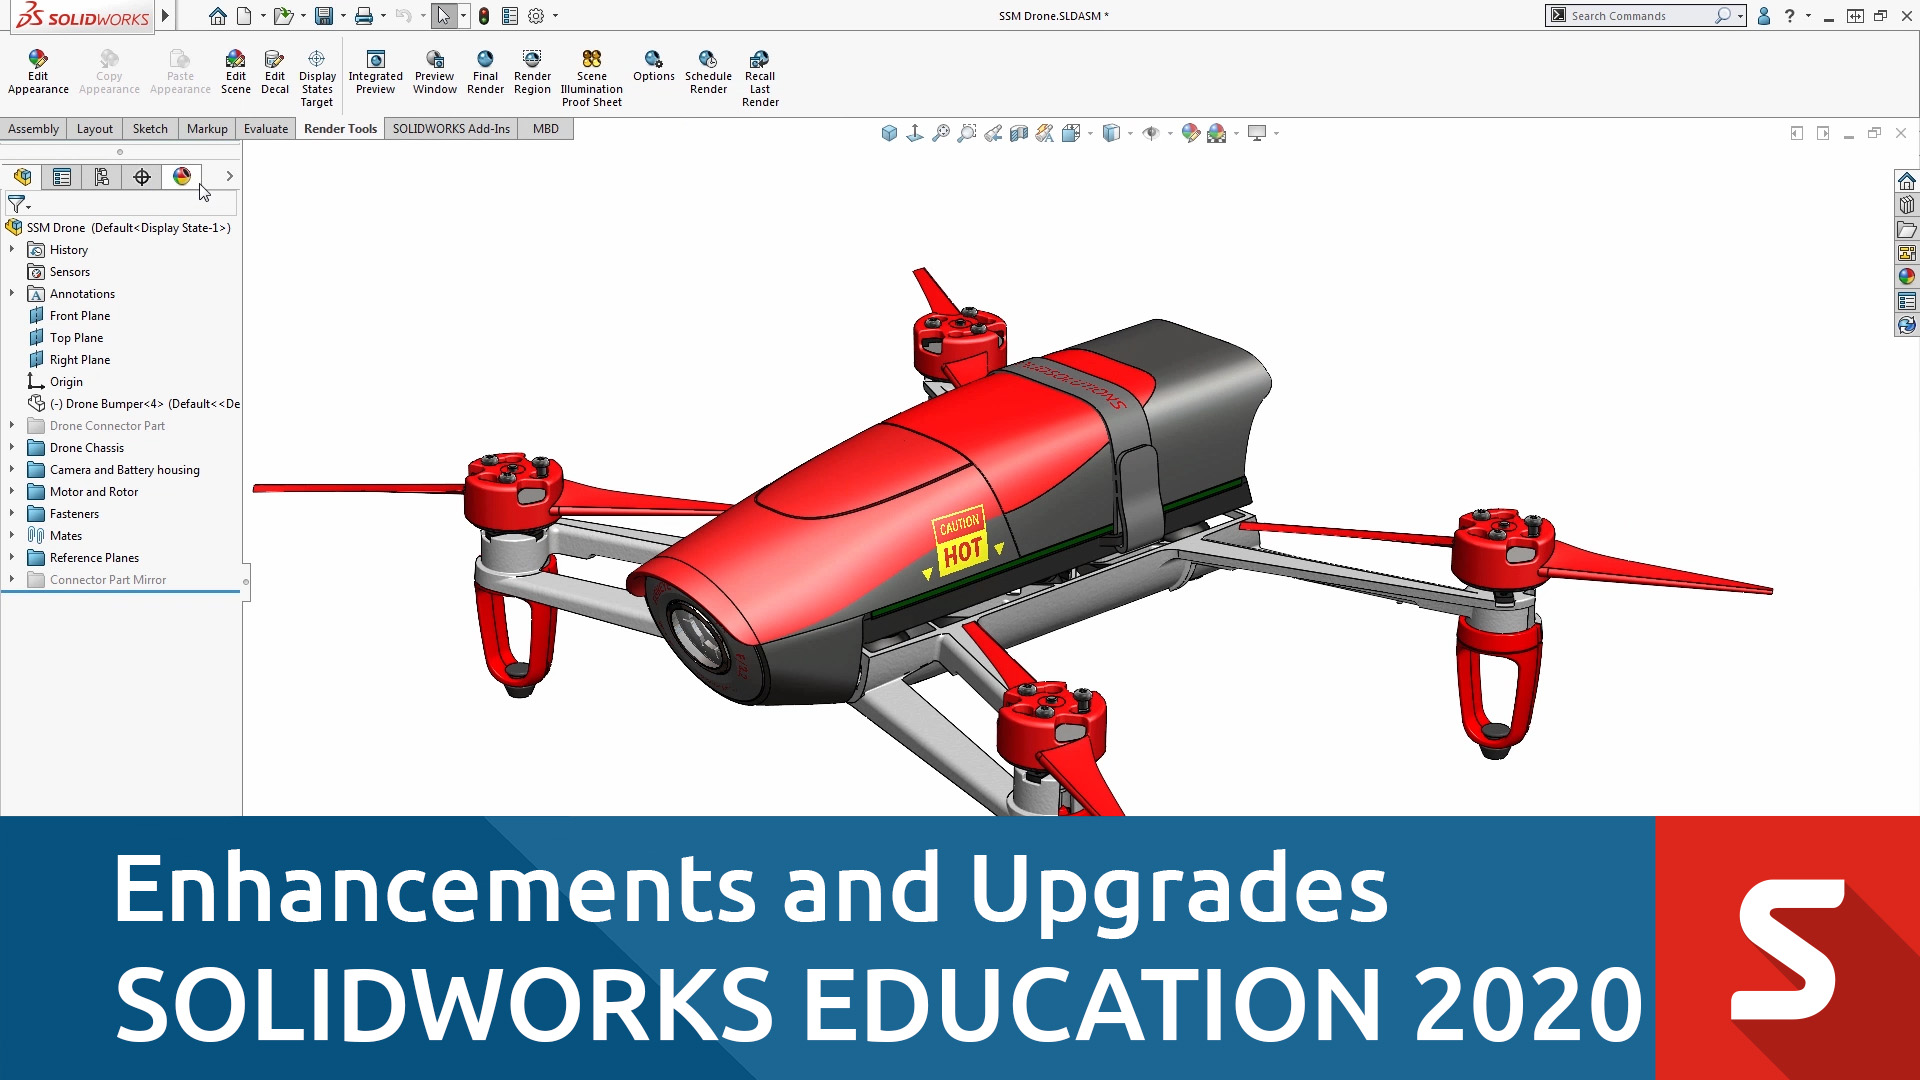 solidworks 2012 education edition download